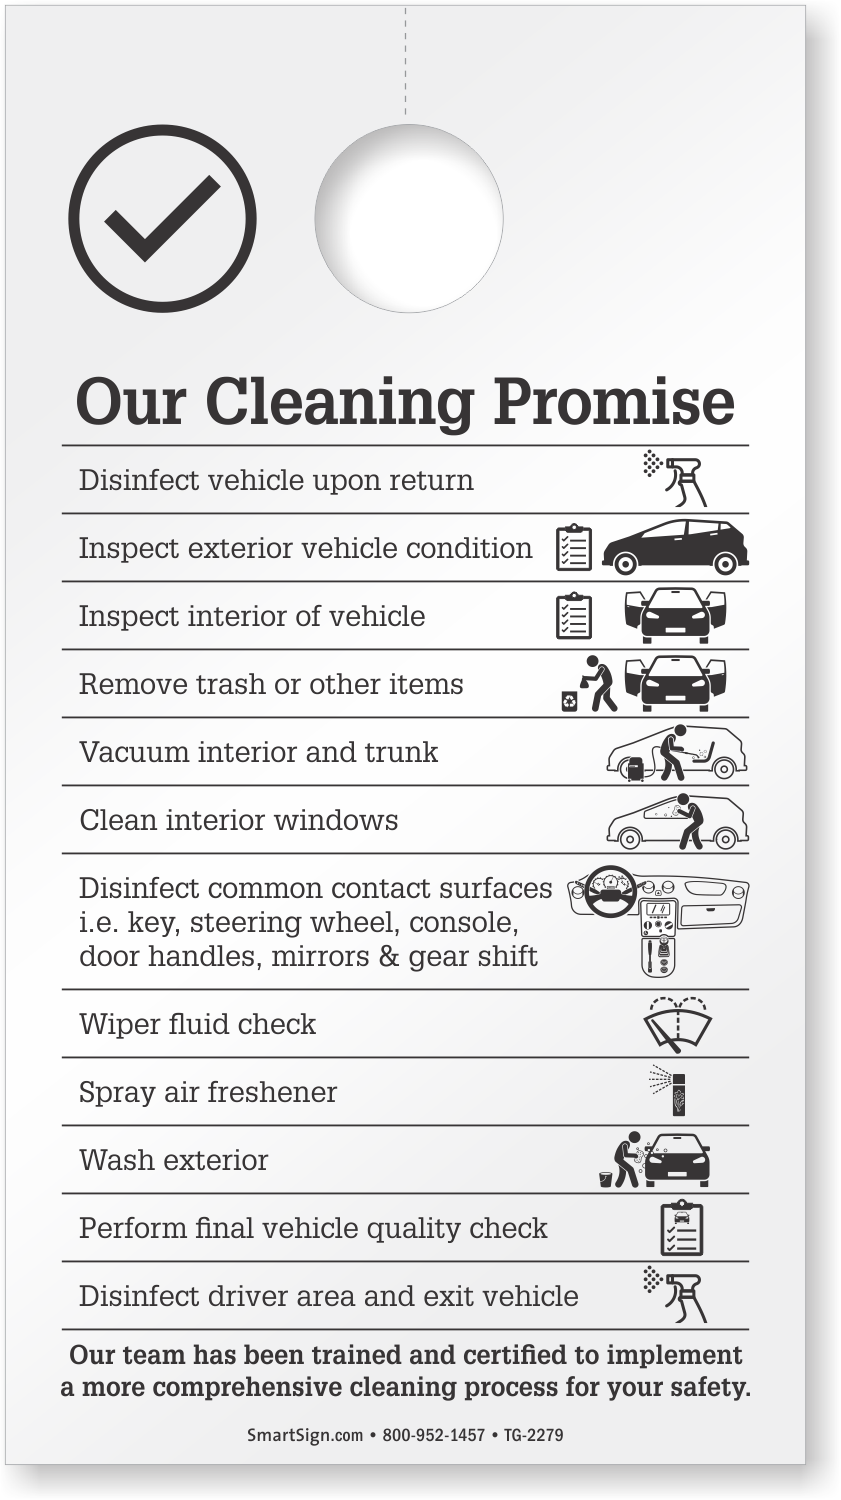 https://www.mydoorsign.com/img/lg/T/our-cleaning-promise-car-cleaning-disinfecting-checklist-white-cardstock-hang-tag-tg-2279.png